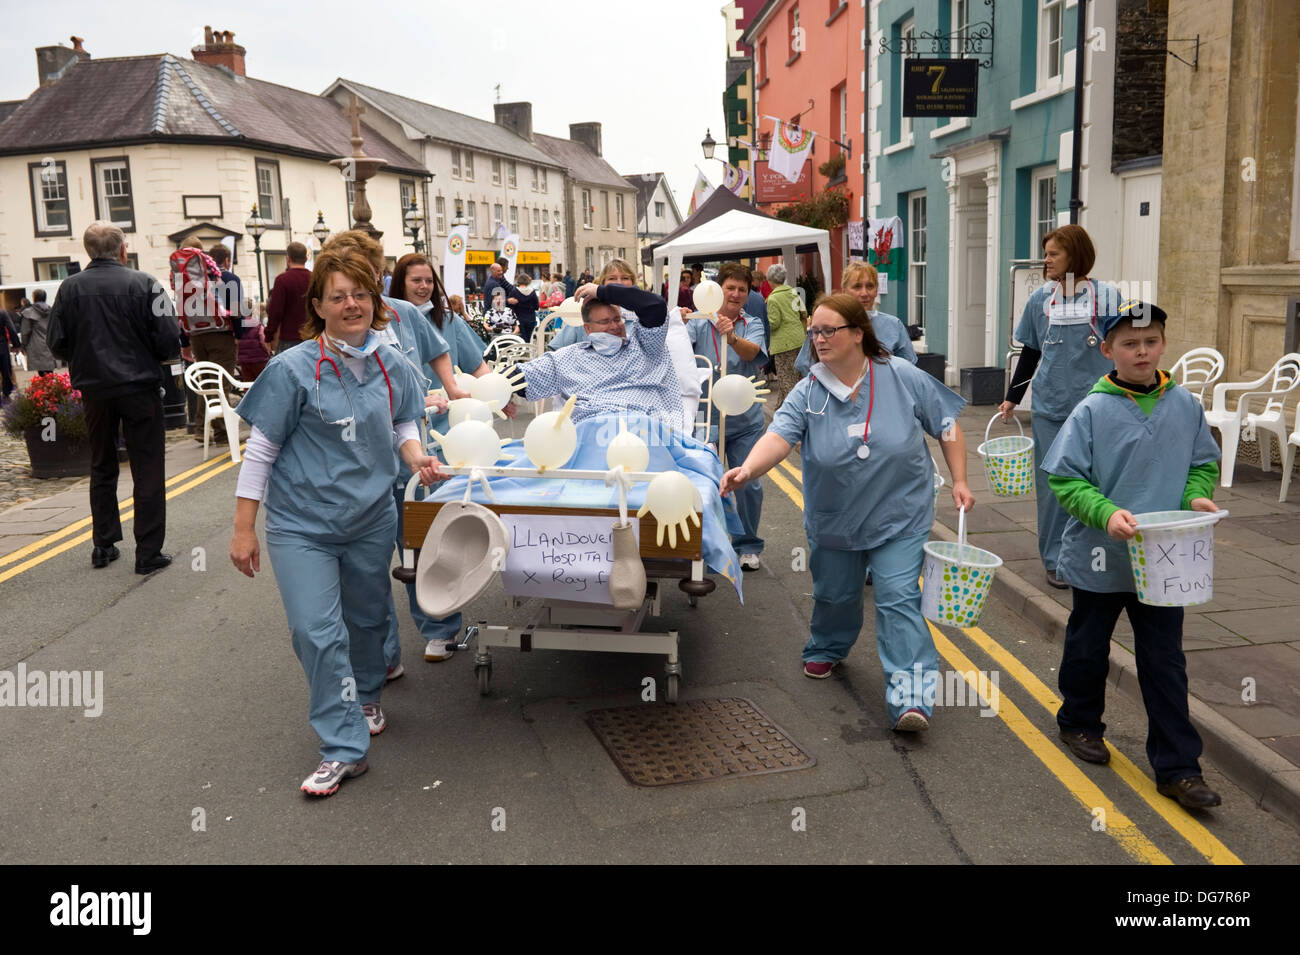 Nurses & doctor on charity bed push raising money for hospital X-ray machine in Llandovery Carmarthenshire South West Wales UK Stock Photo